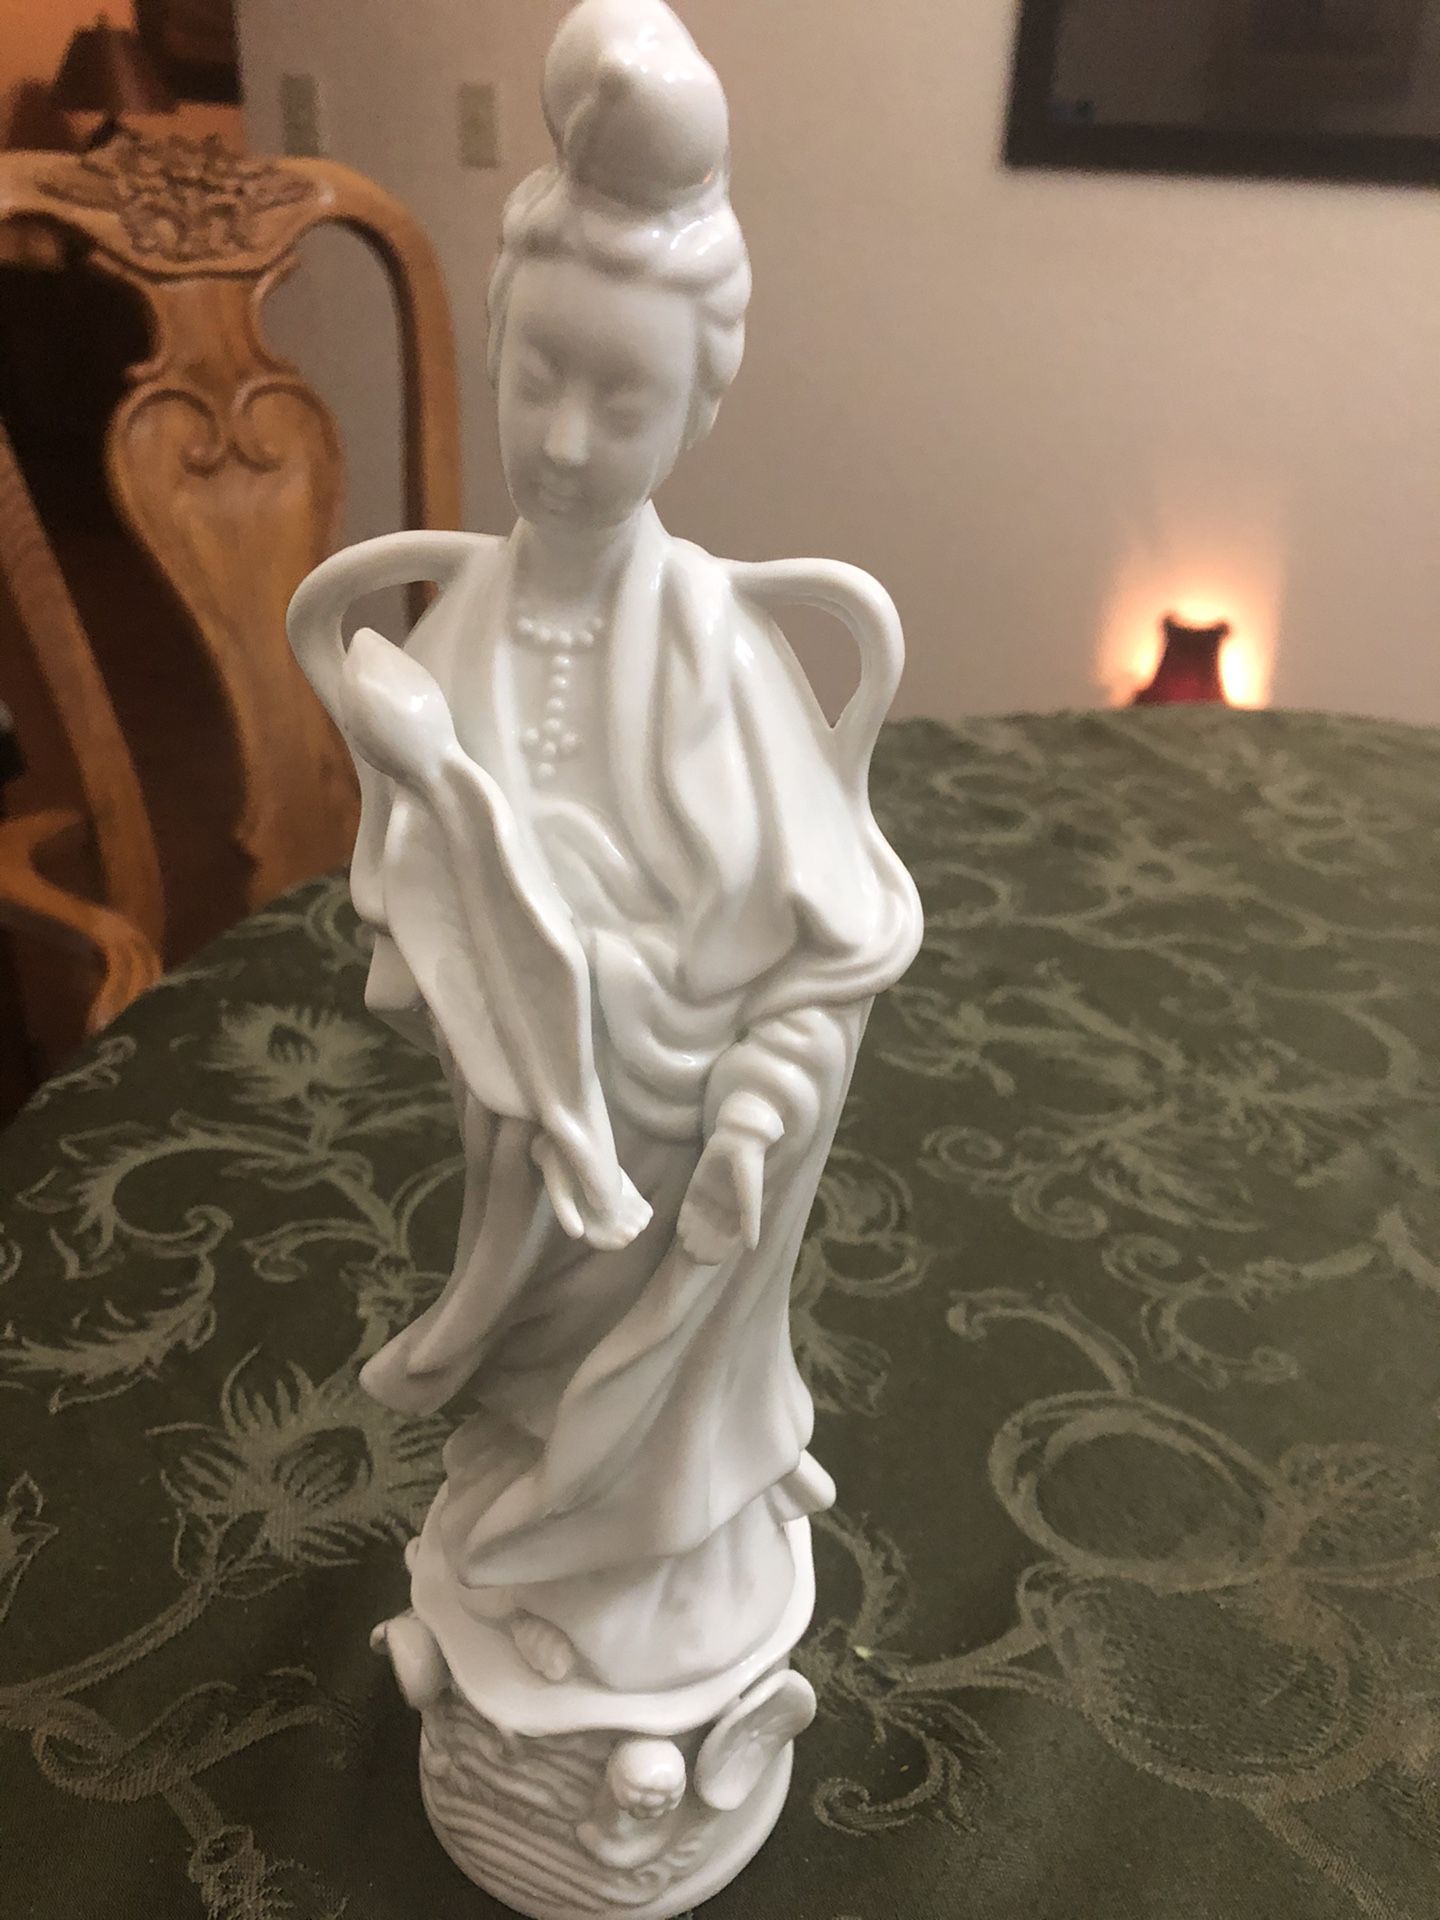 White porcelain statue figurine numbered w/crossed bows mark on back 12”h